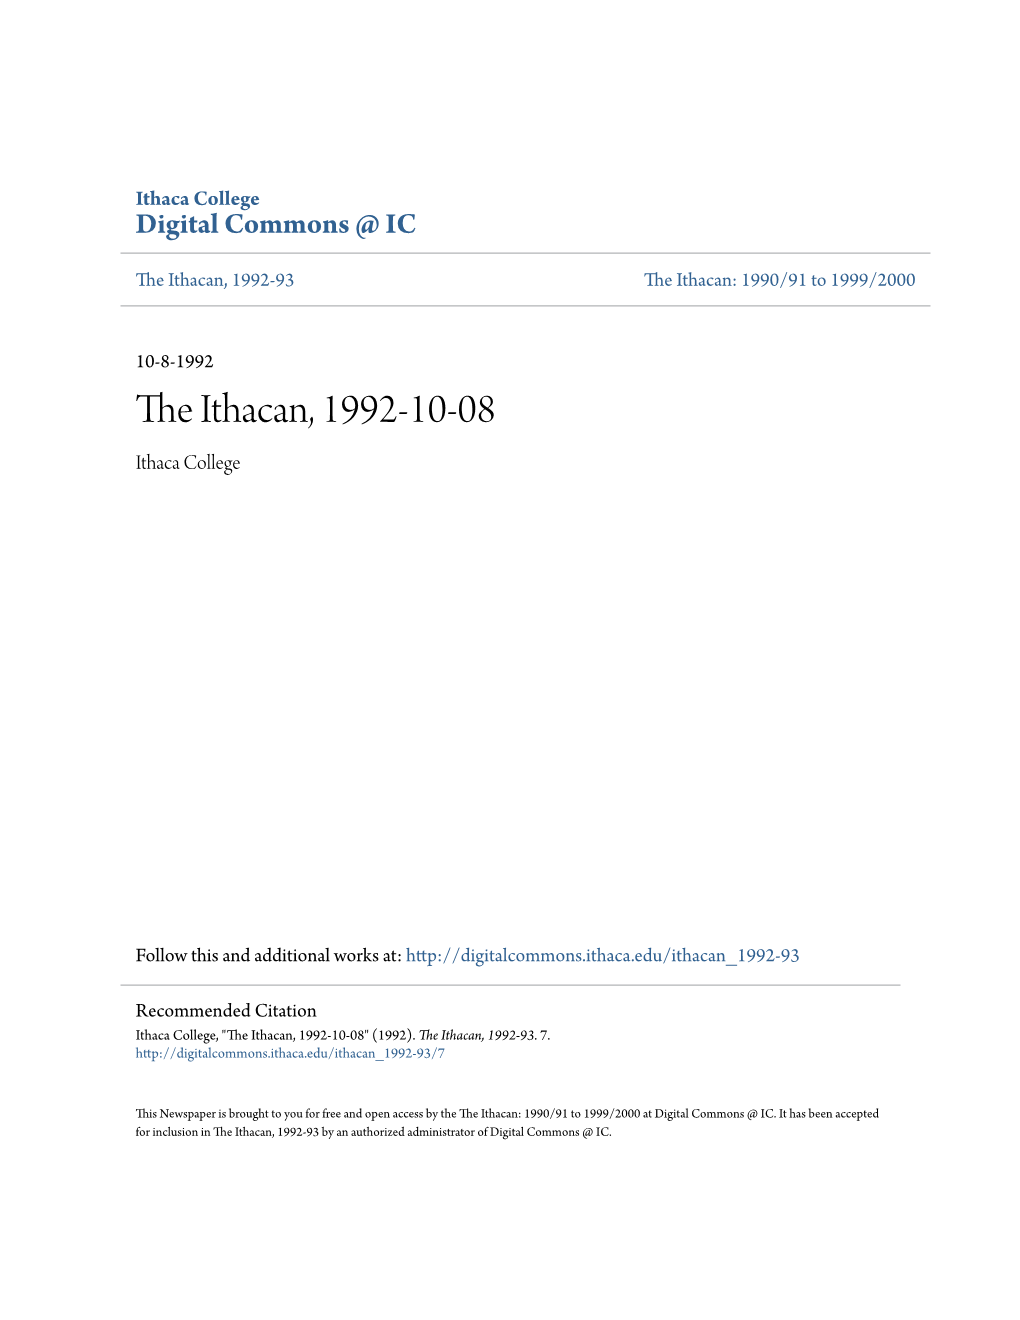 The Ithacan, 1992-10-08